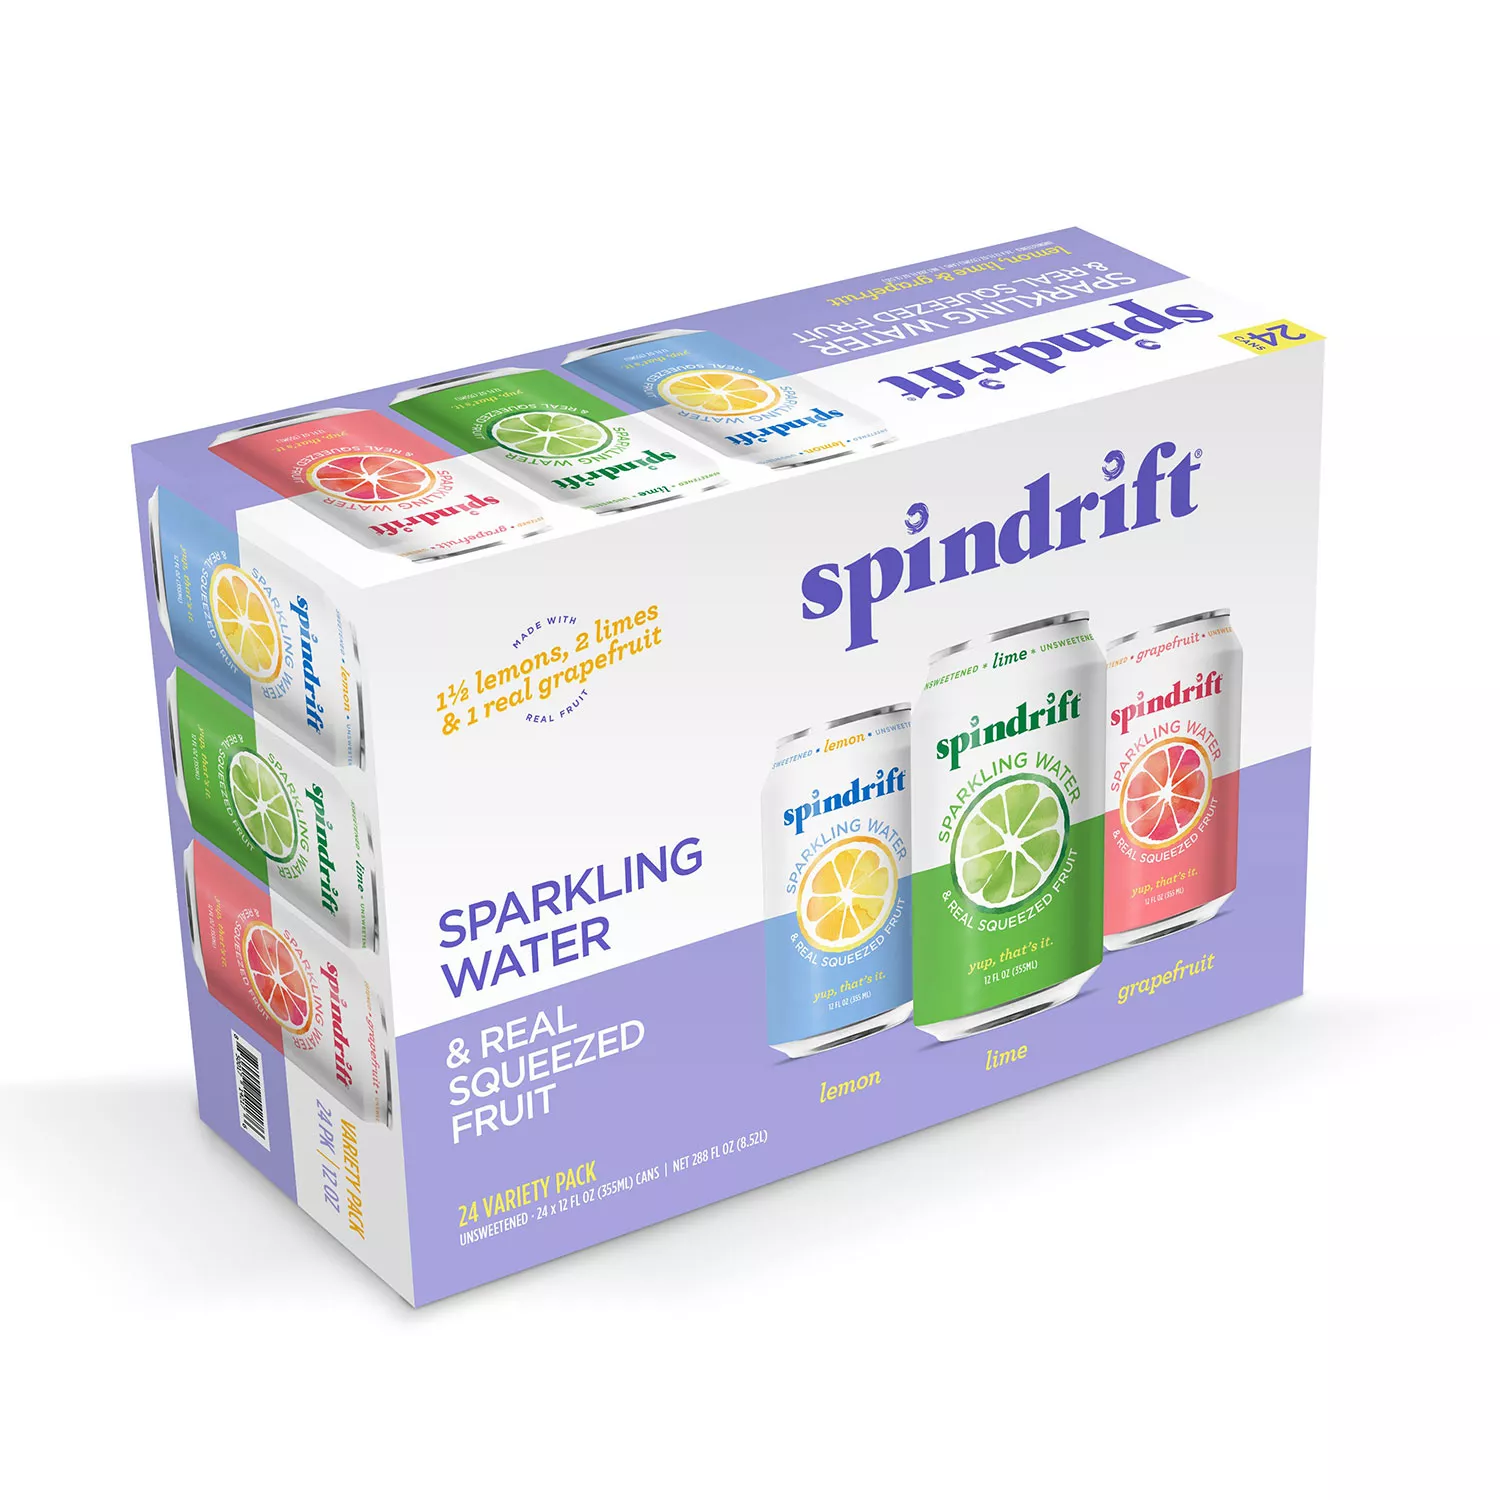 Buy from Fornaxmall.com- Spindrift Sparkling Water with Real Squeezed Fruit, Variety Pack -12 fl oz - 24 Pack